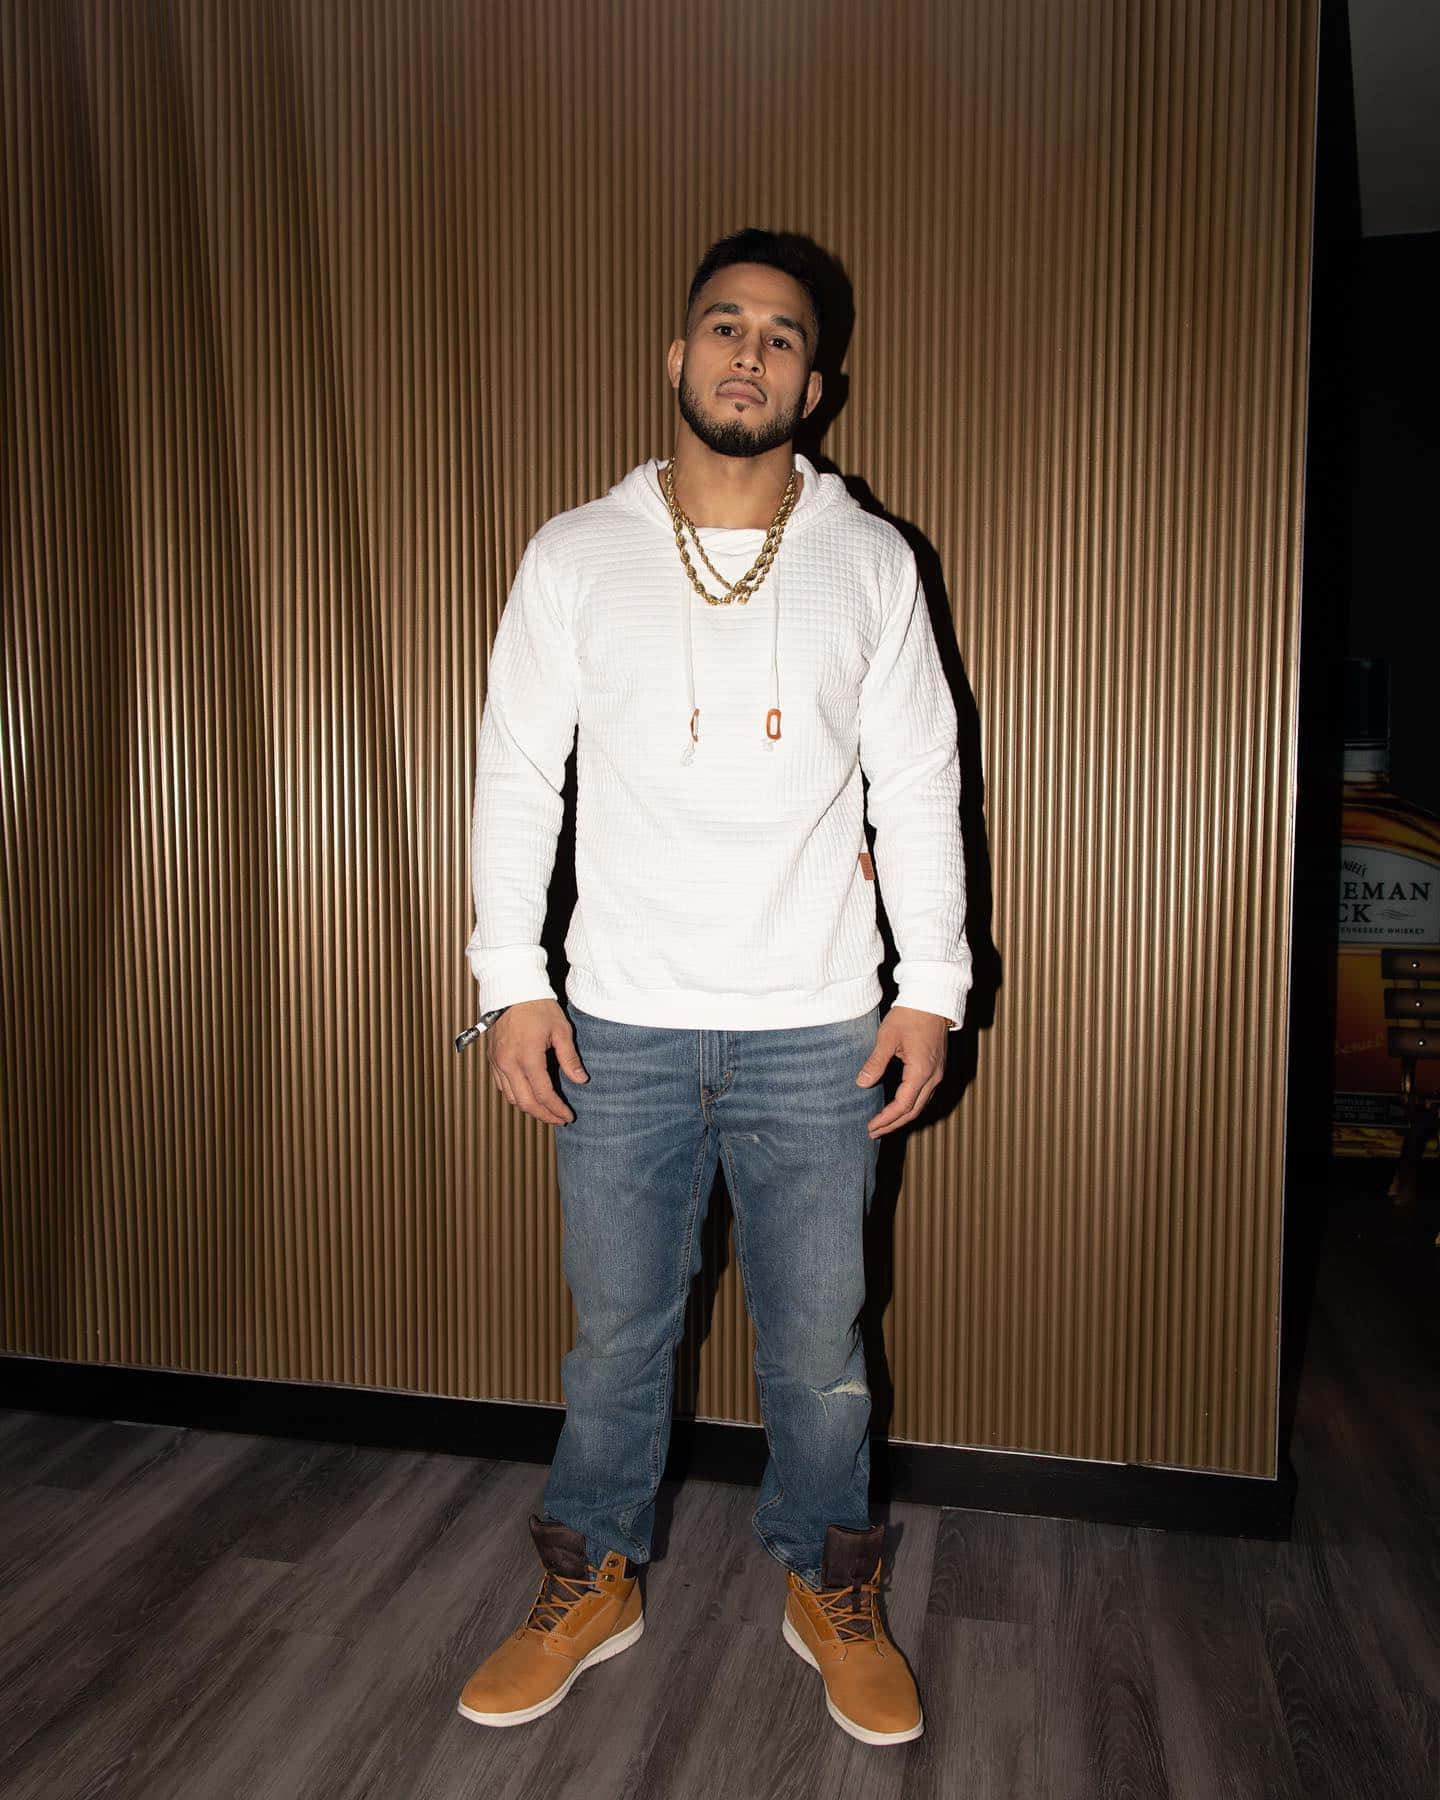 Brad Tavares In White Shirt With Gold Chain Wallpaper